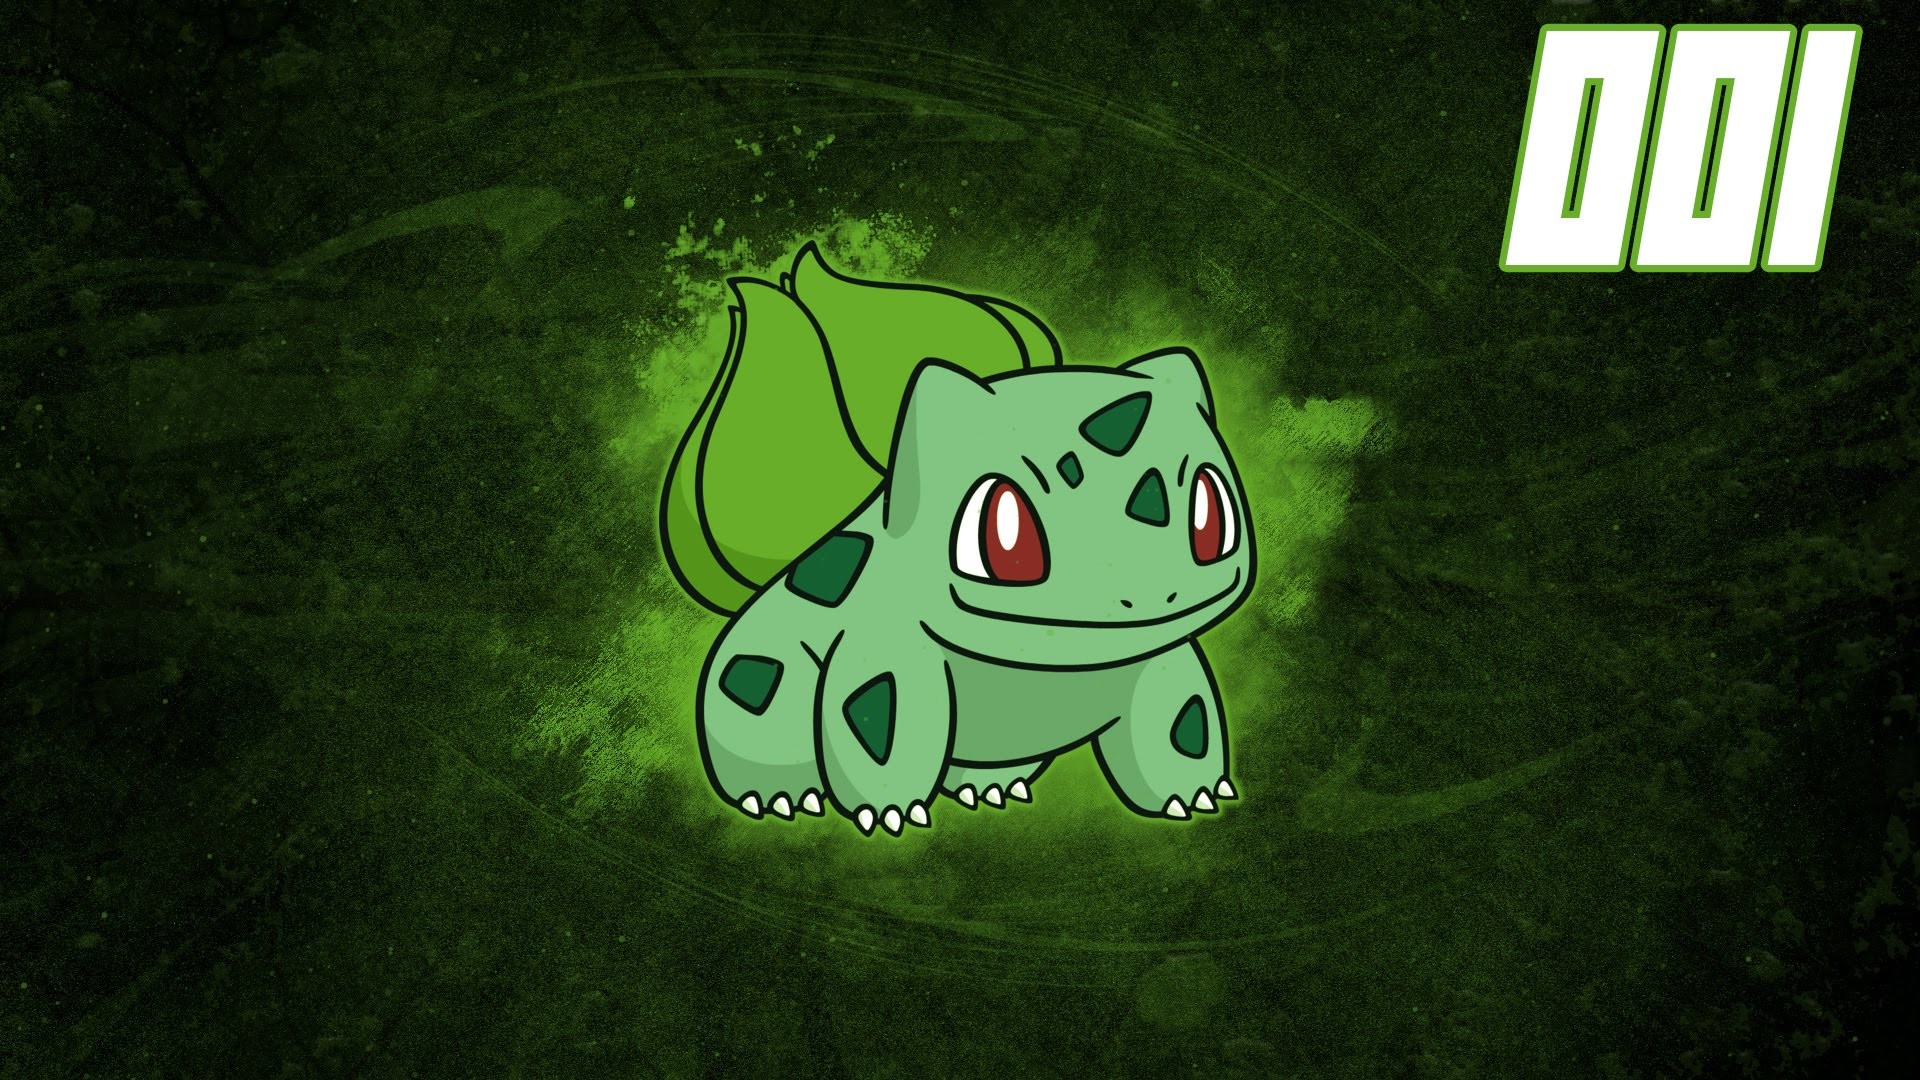 Download wallpapers 4k Pokemon Bulbasaur GFF turquoise grunge  background Garena Free Fire vortex Garena Free Fire characters Pokemon  Bulbasaur Skin Free Fire Battlegrounds Pokemon Bulbasaur Free Fire for  desktop free Pictures for